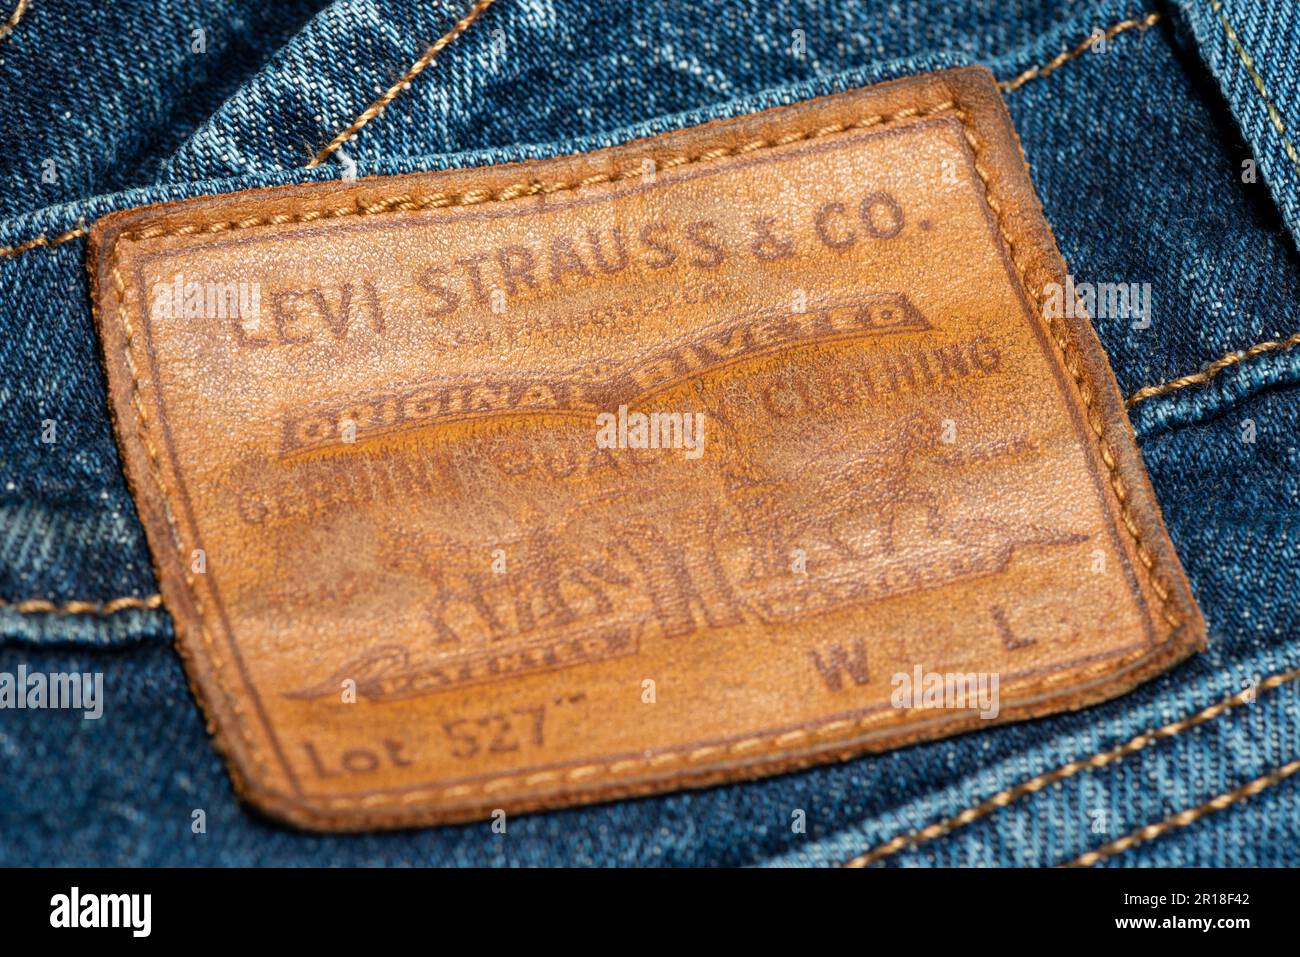 Levi's jeans branded leather emblem for 527 boot cut model Stock Photo